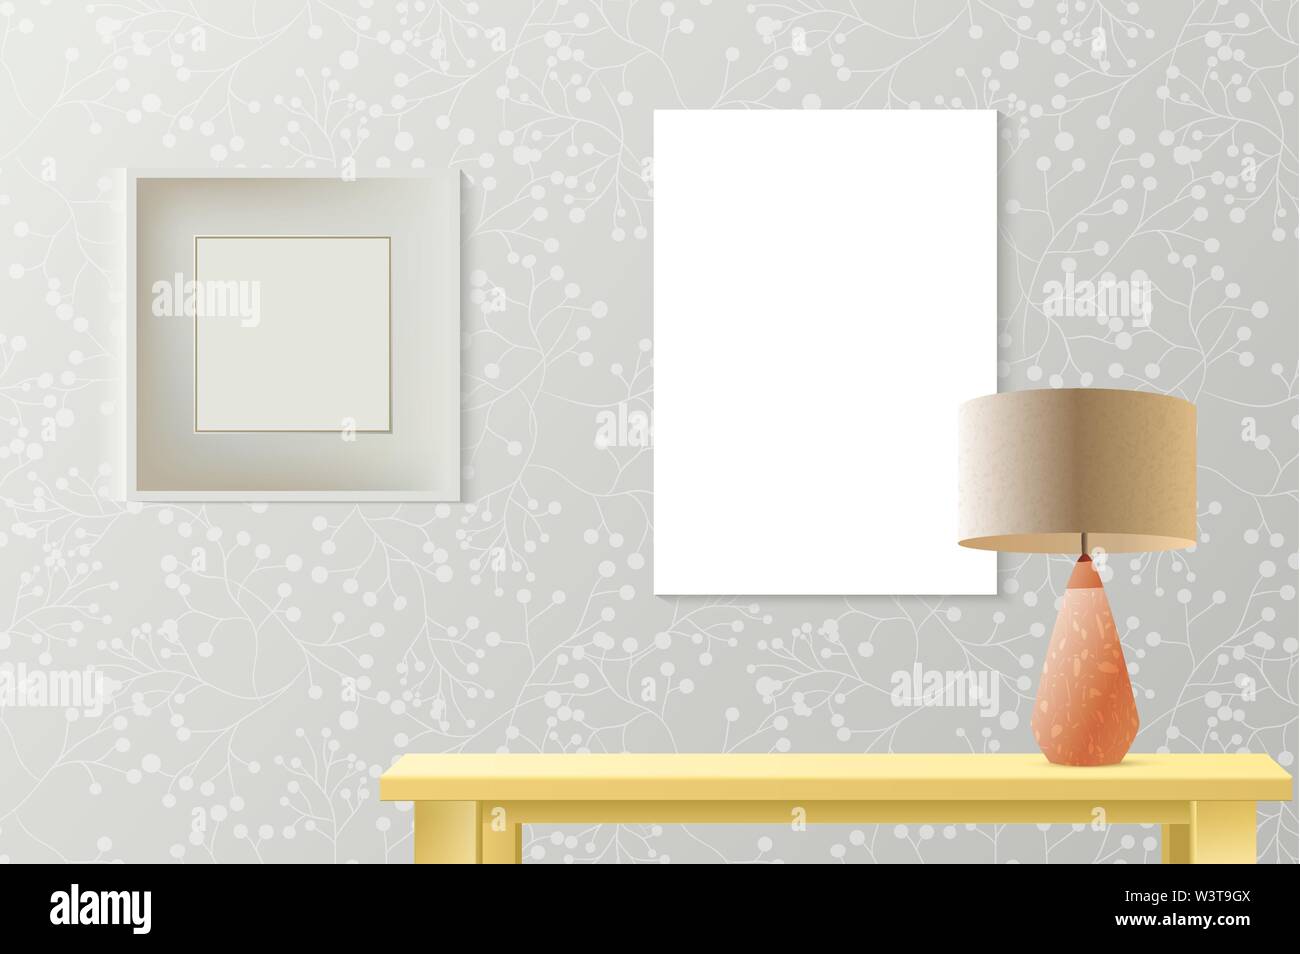 Interior room realistic mockup with frame,poster, picture on patterned wall, wooden table, lamp. Layered and editable,fashion trendy warm colors. Vector mockup for business or artwork presentation Stock Vector